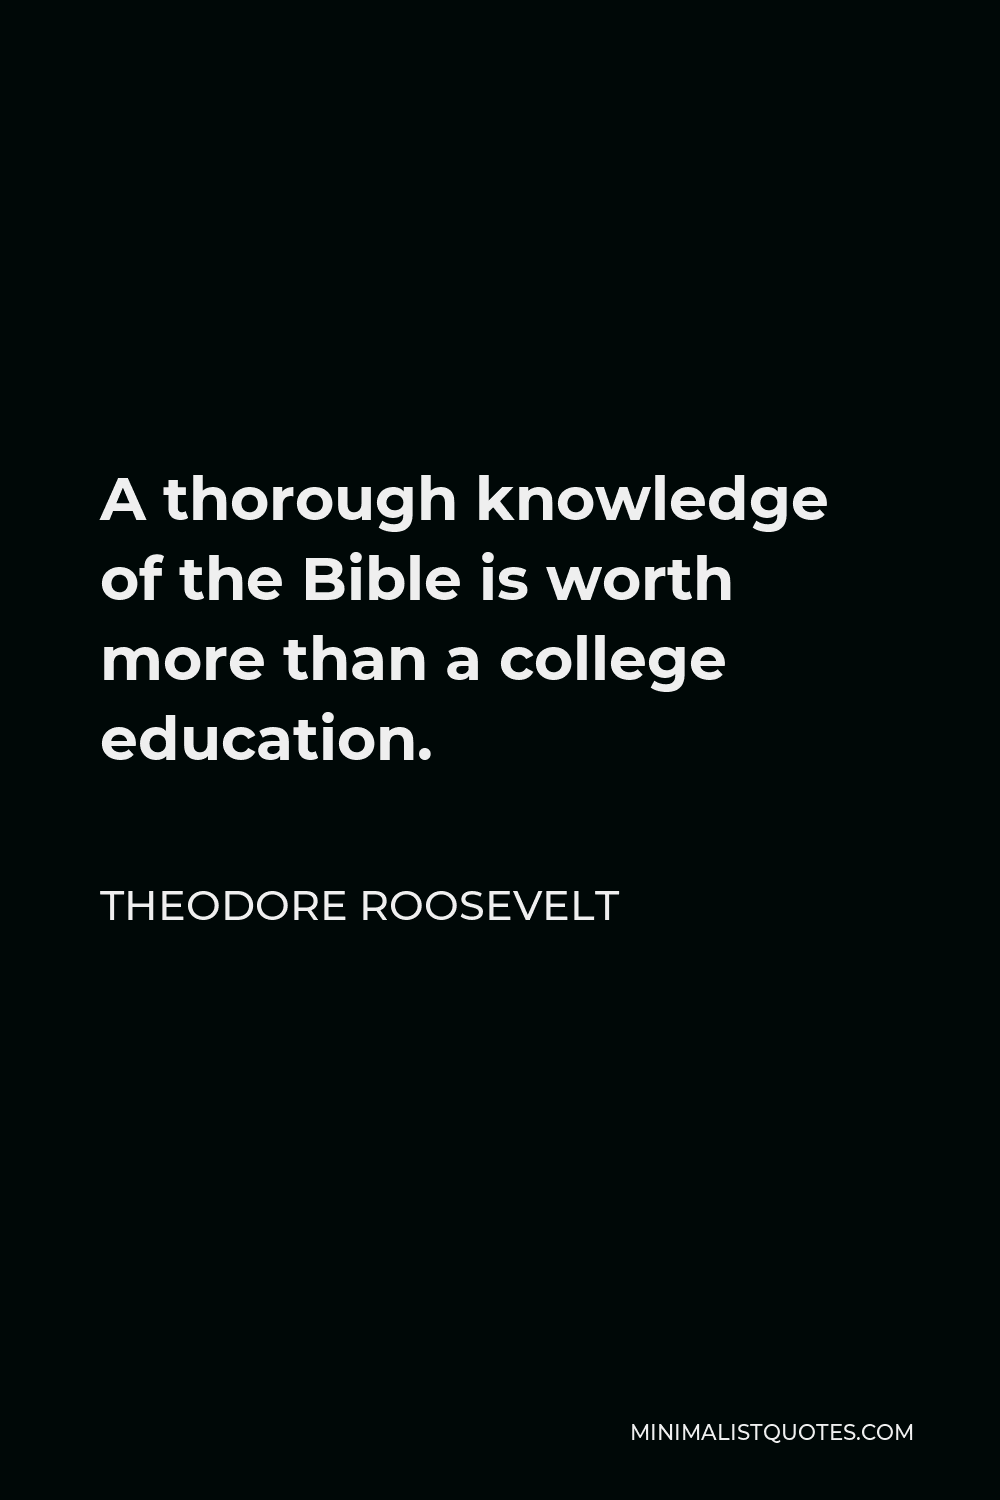 Theodore Roosevelt Quote - A thorough knowledge of the Bible is worth more than a college education.